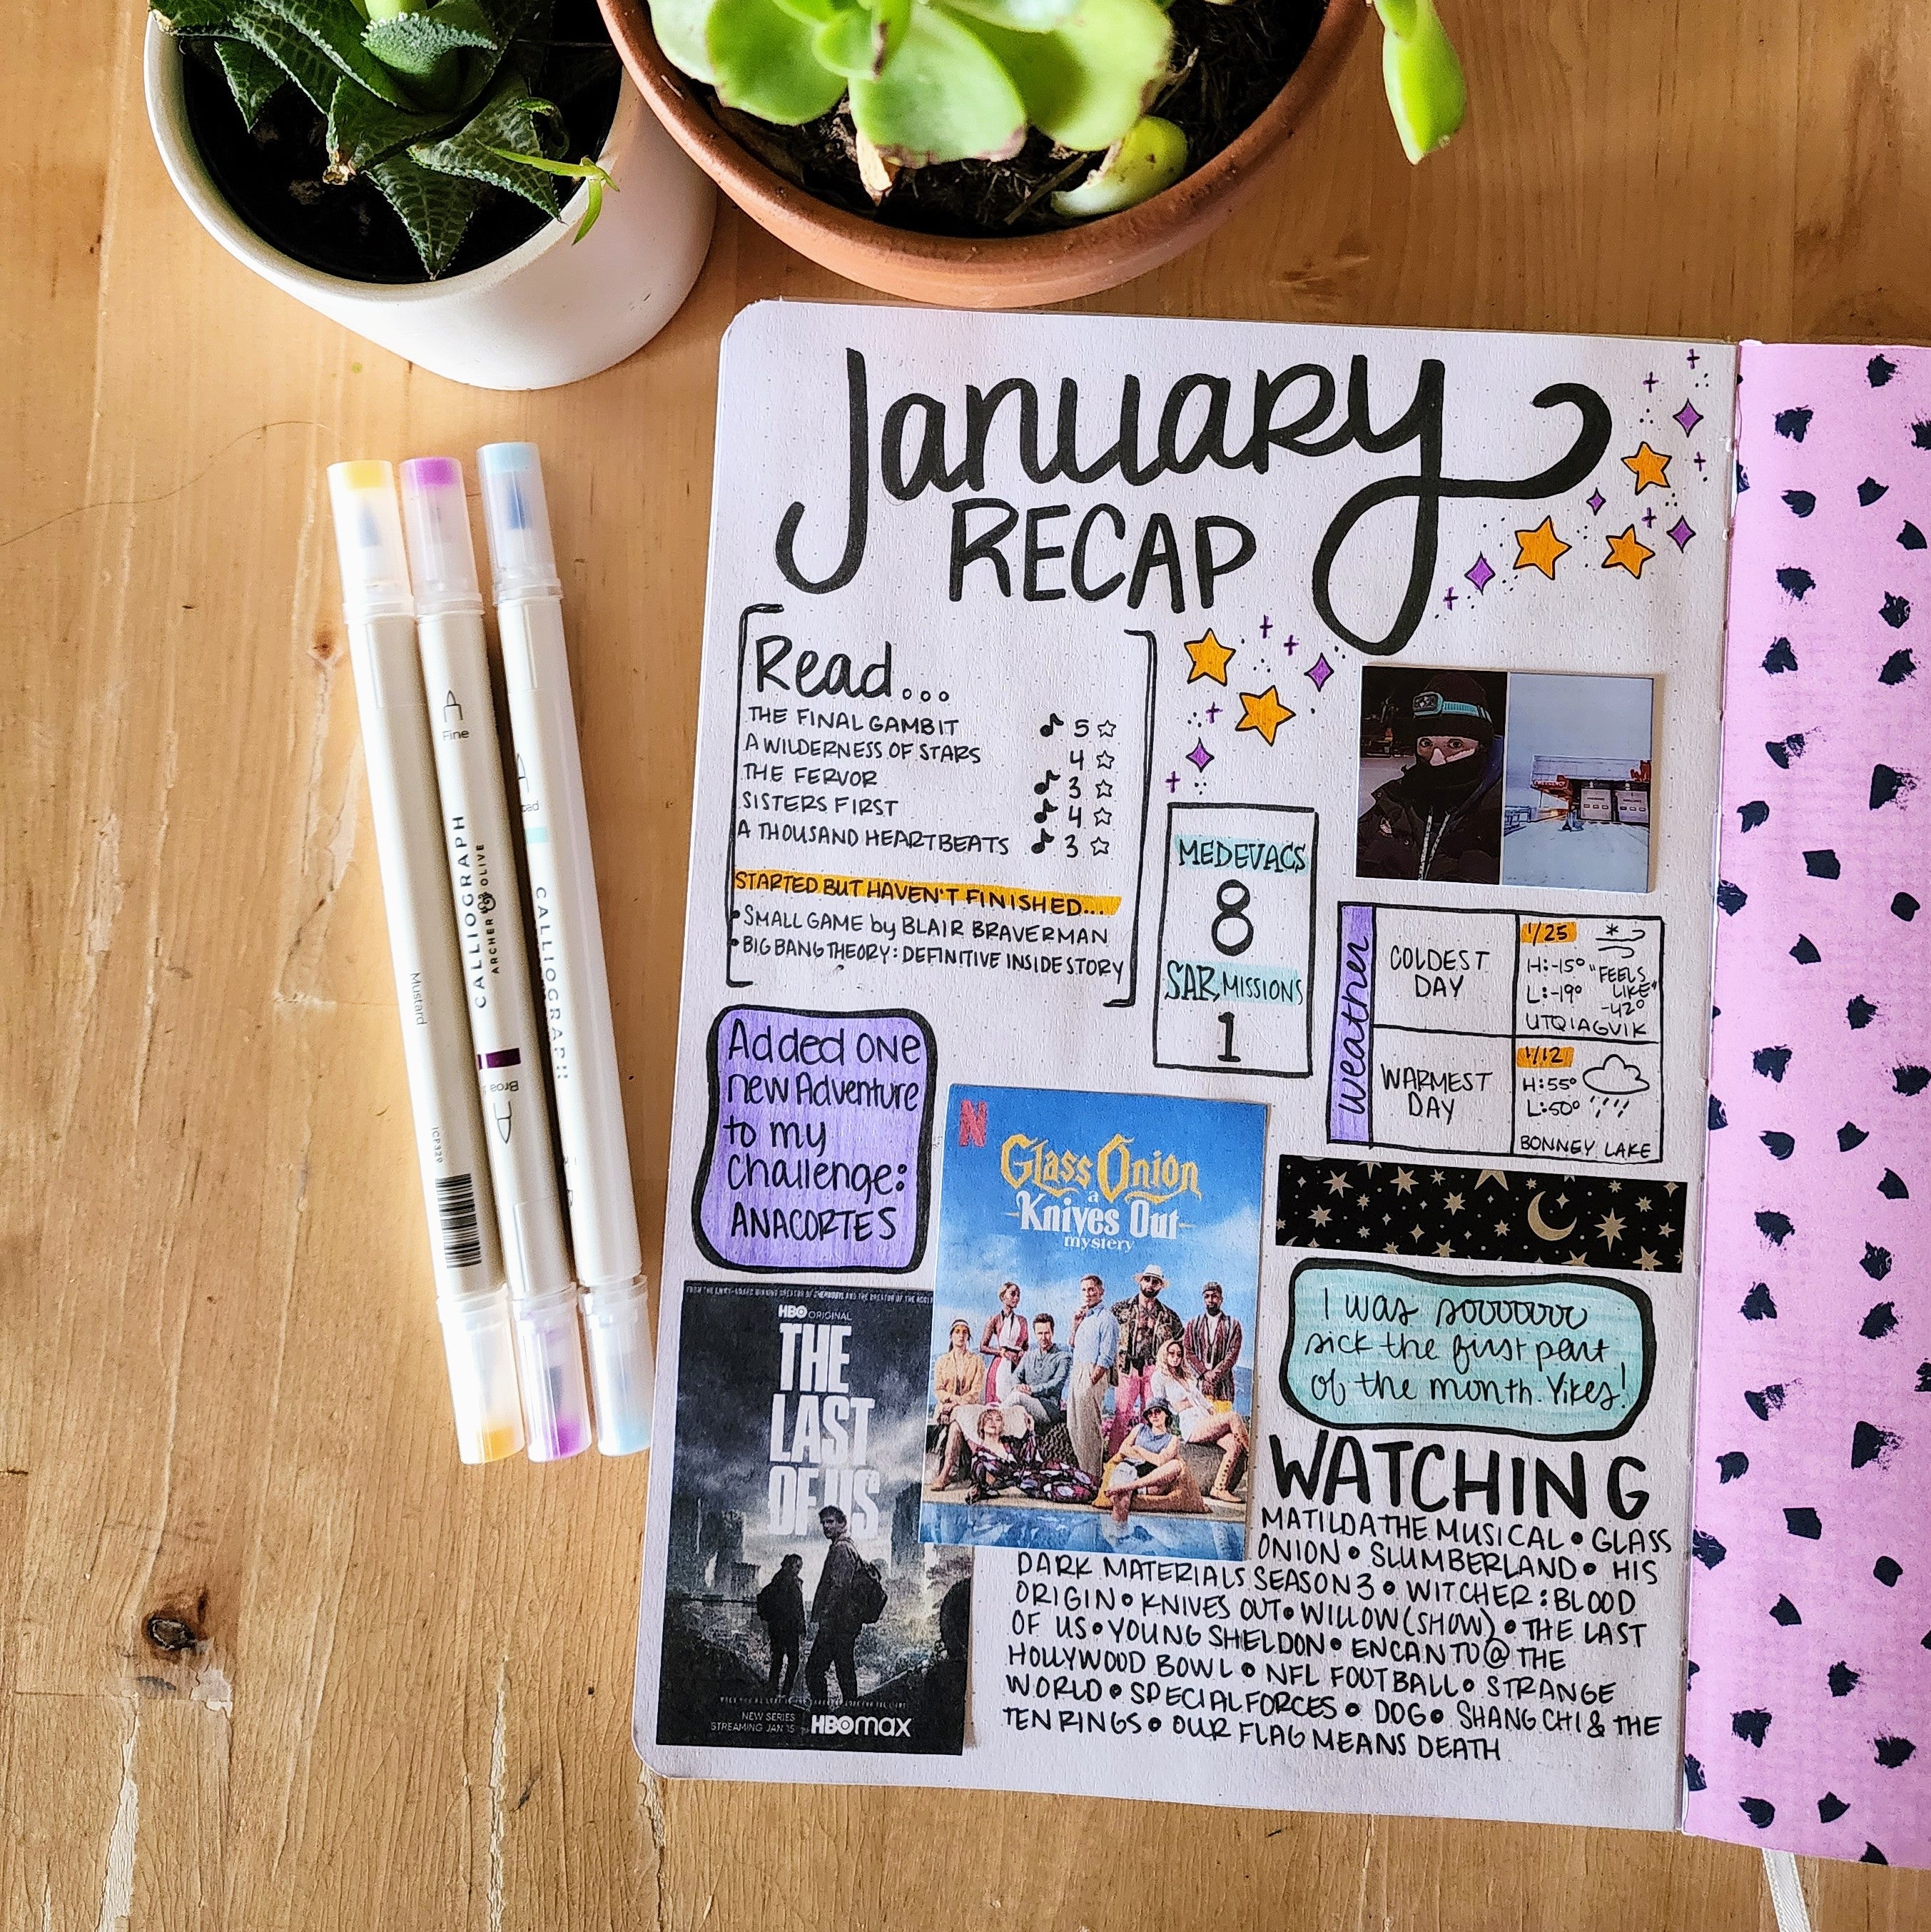 The Best Bullet Journal Supplies To Make Perfect Layouts And Spreads